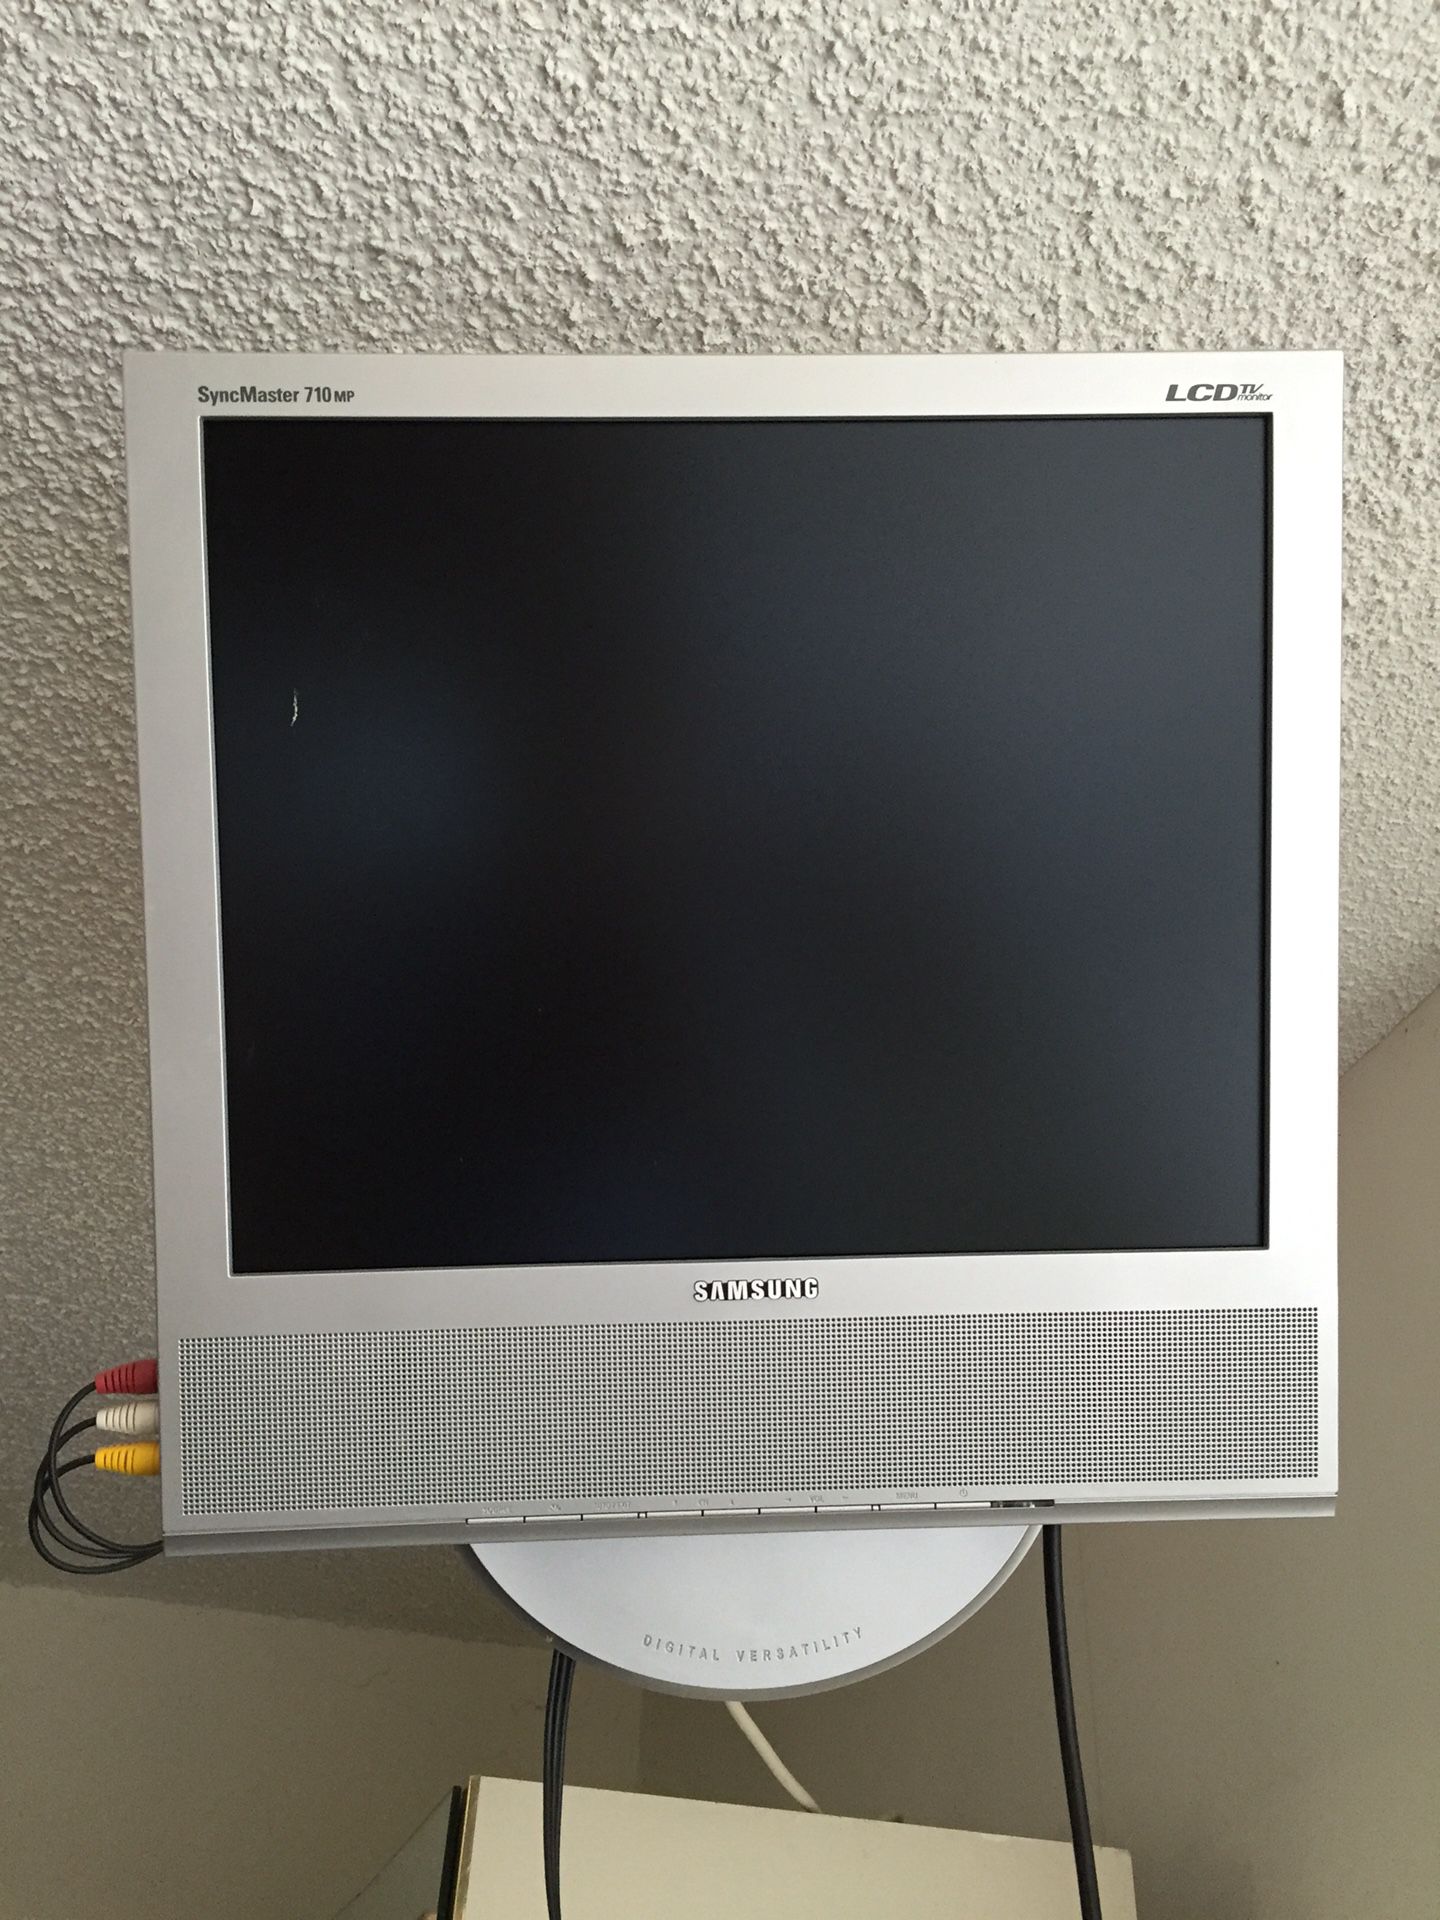 Samsung monitor and/or TV